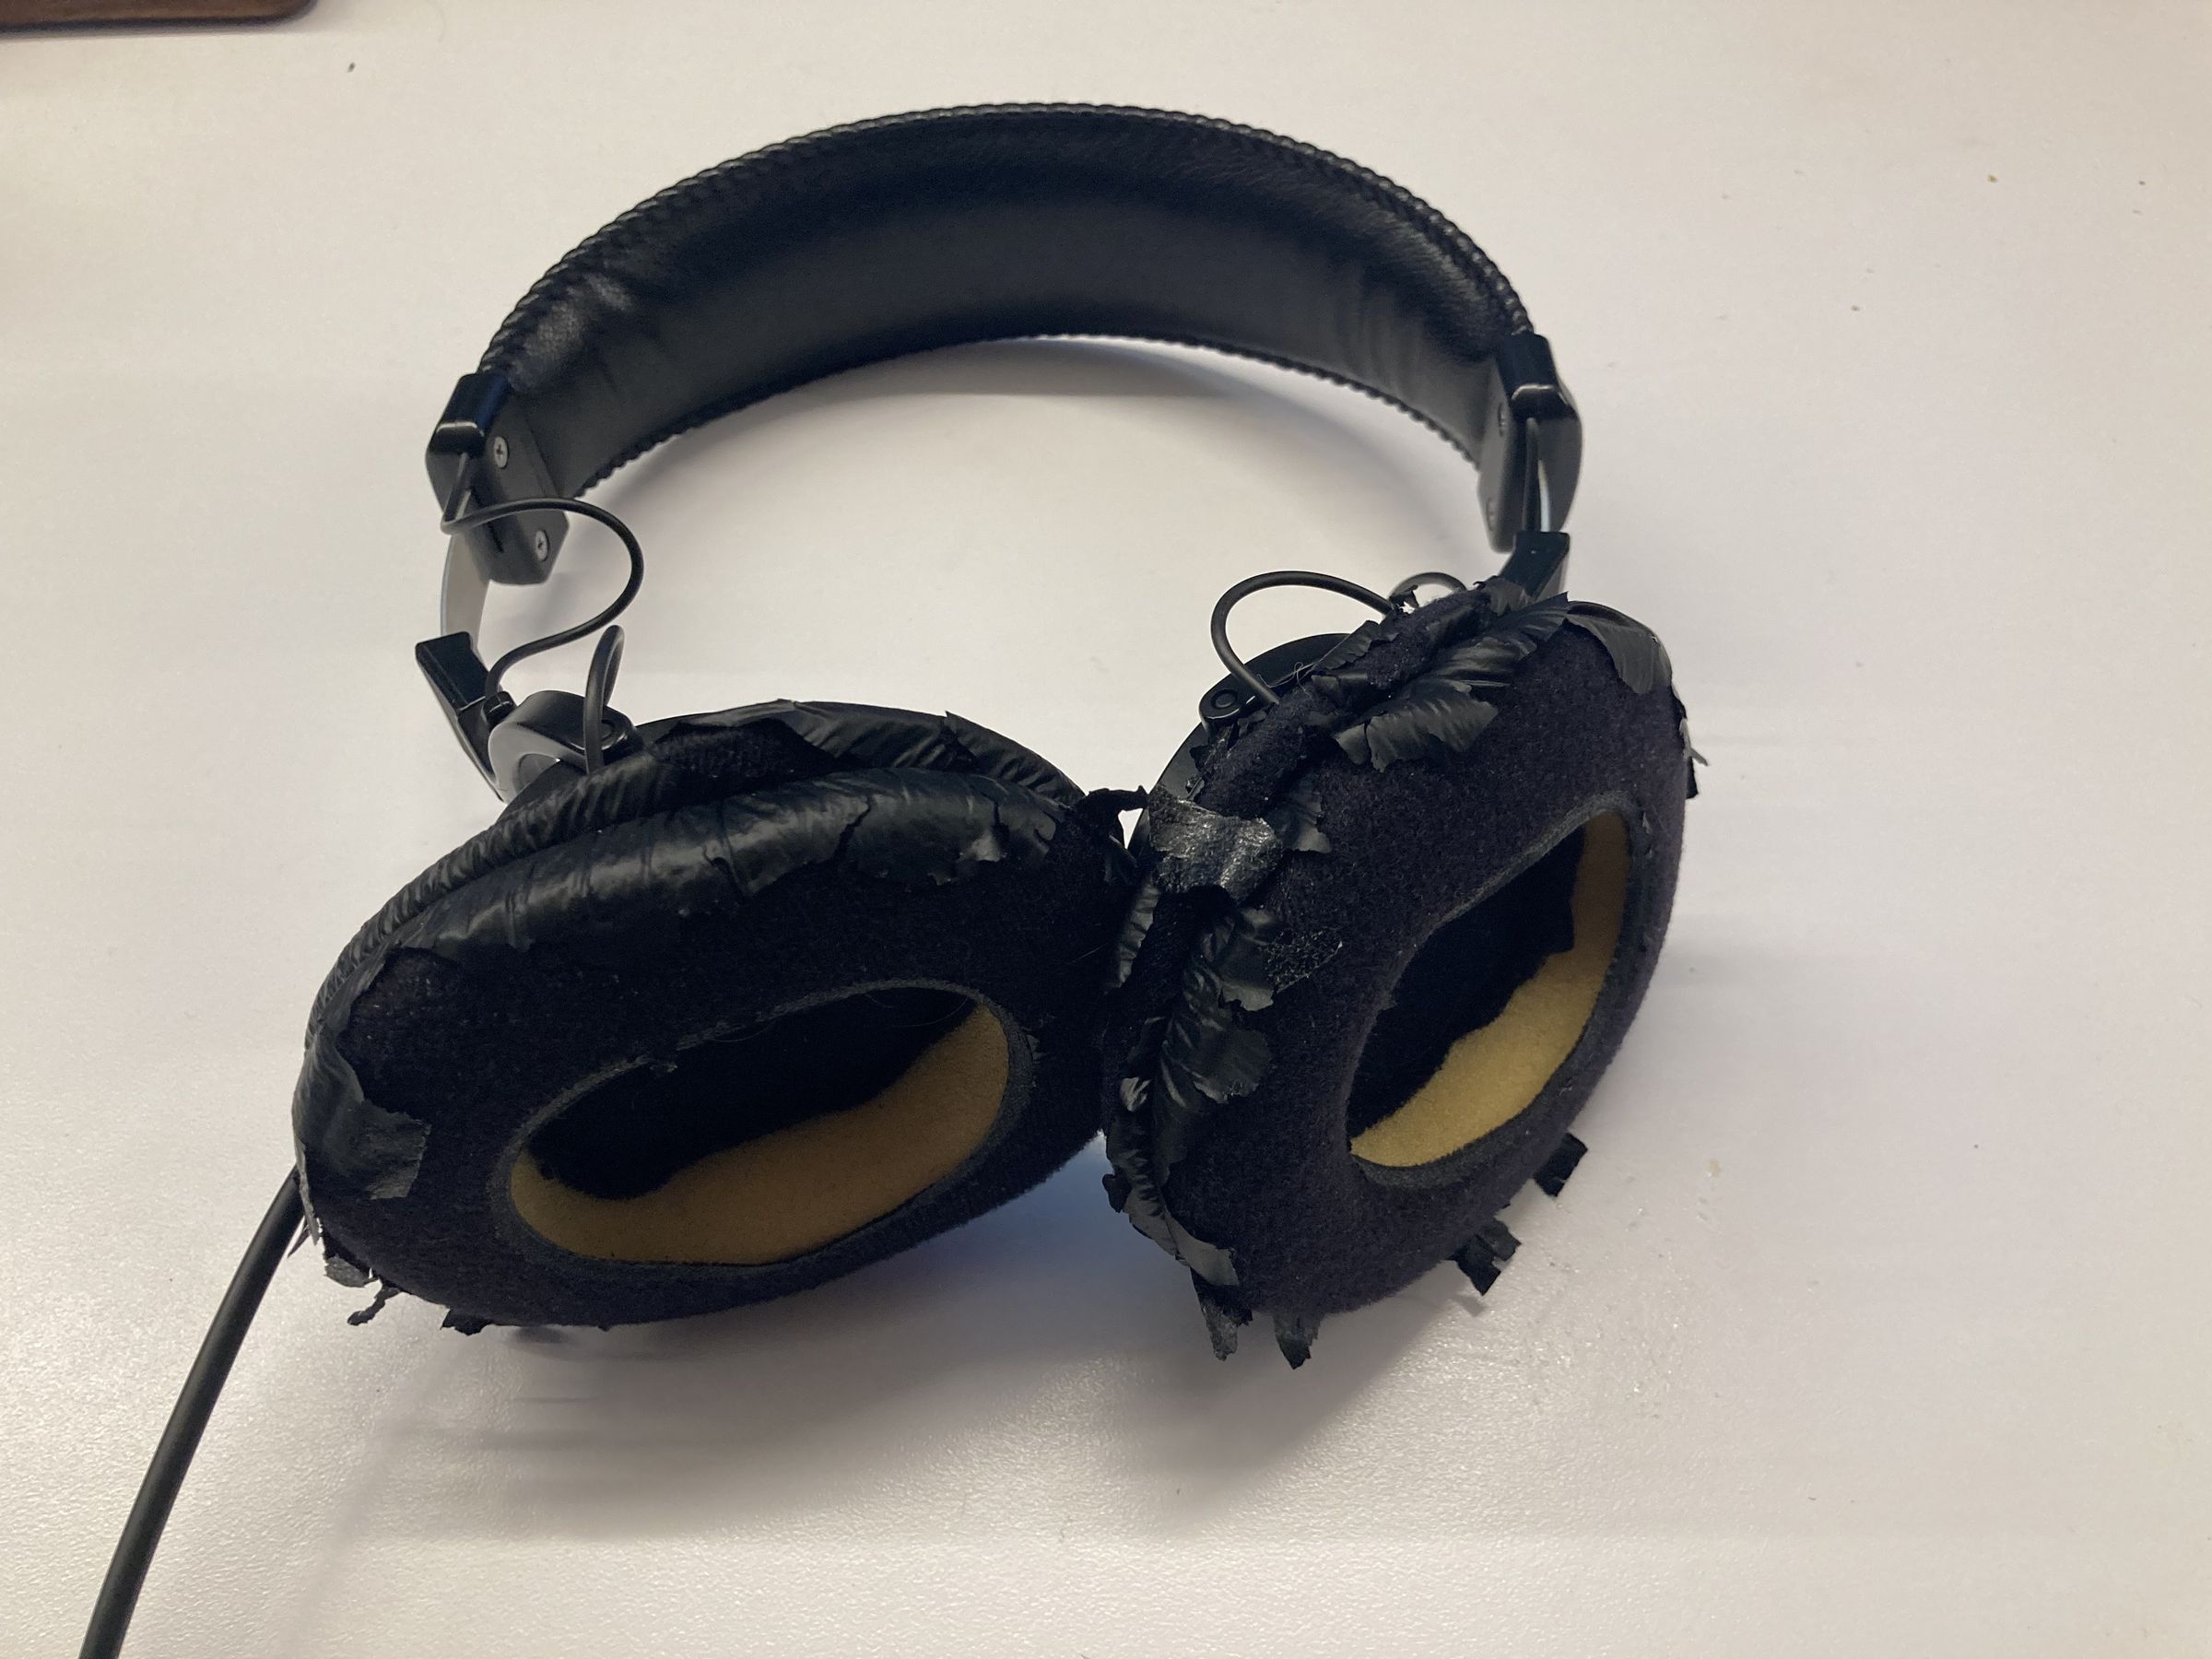 A pair of Sony MDR-7506's with badly damaged sound boards.